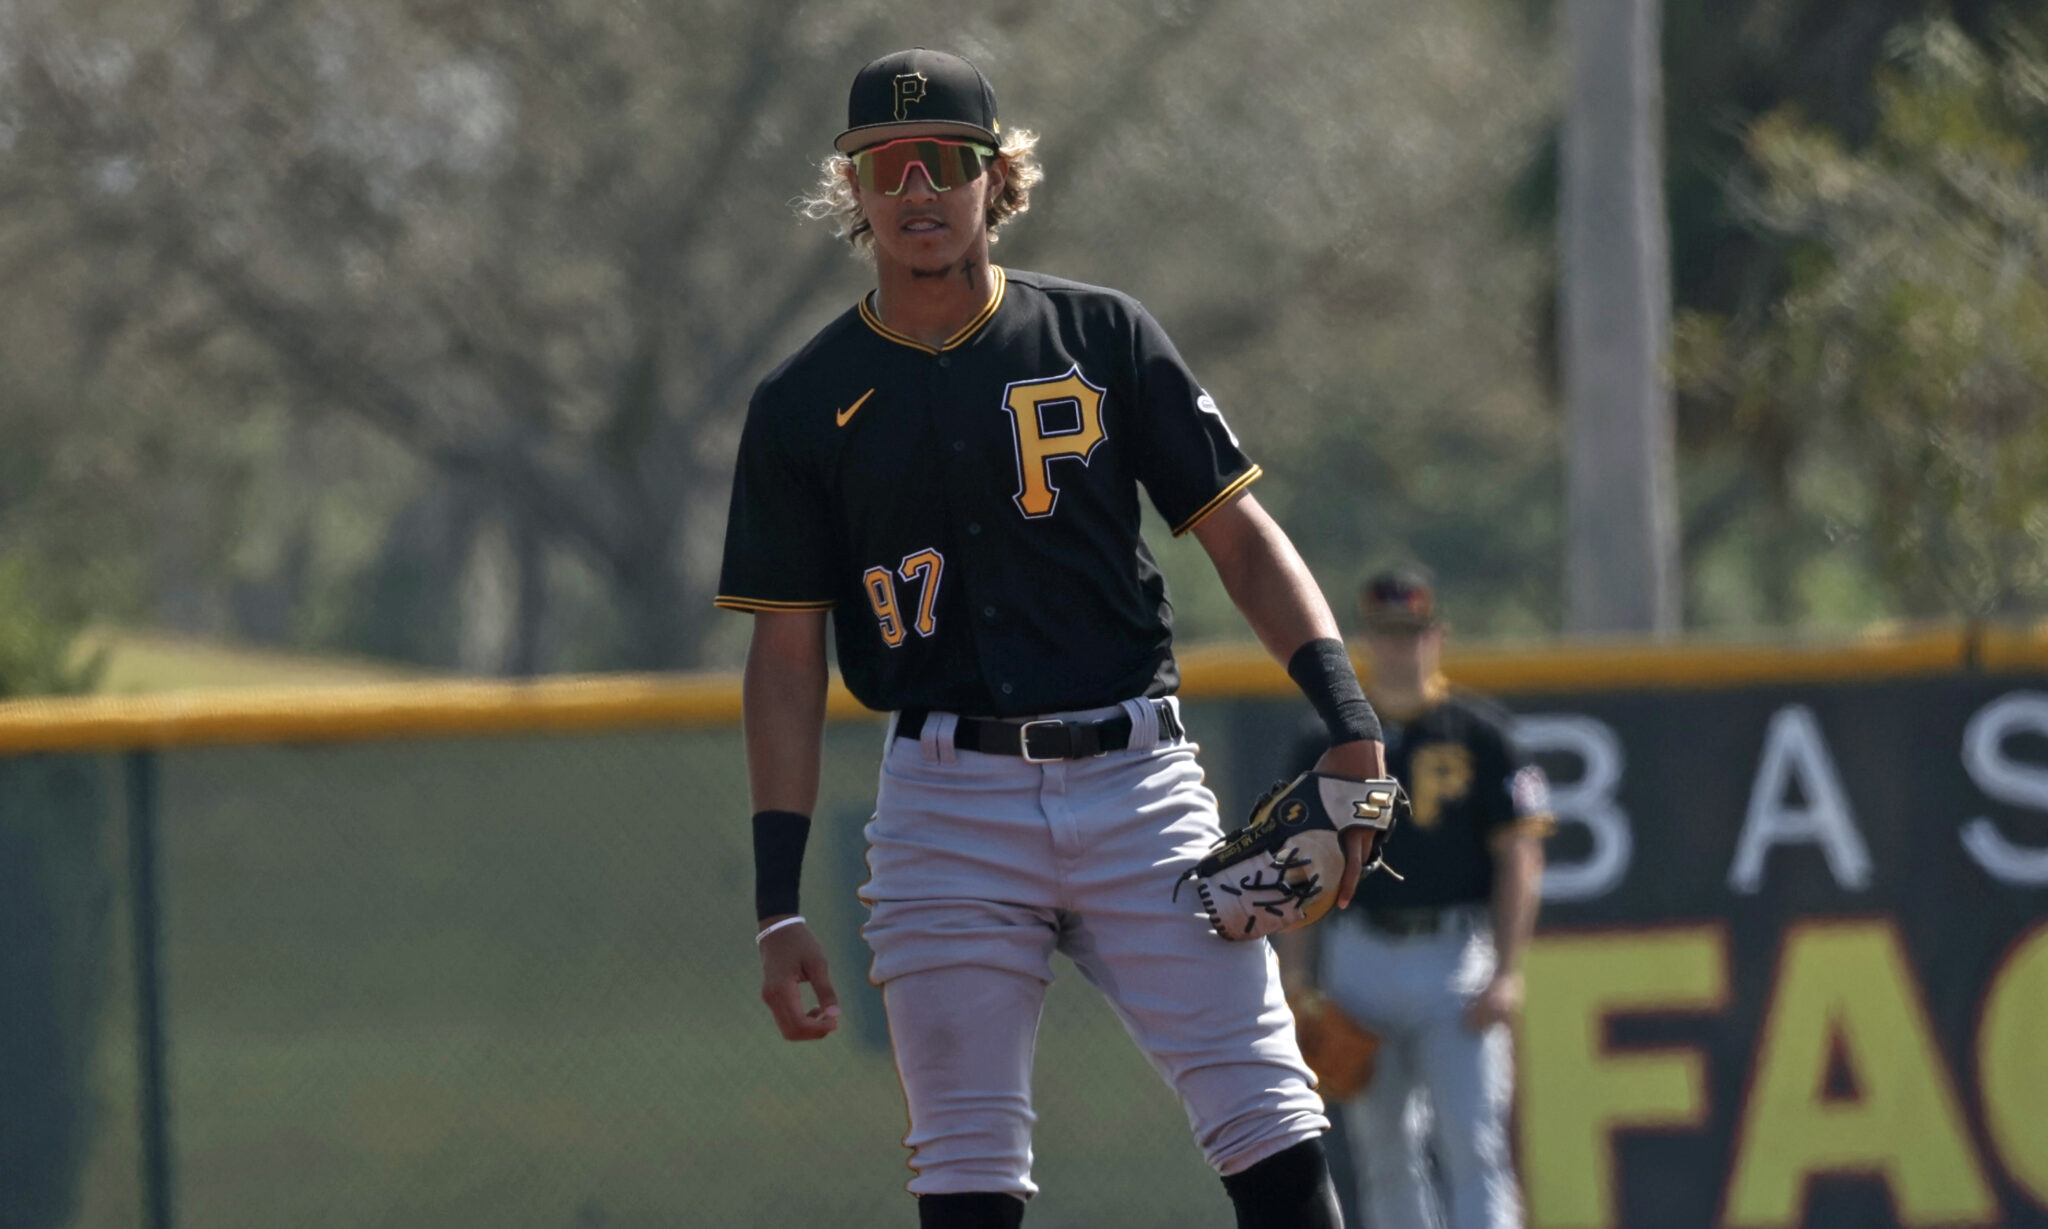 MLB Draft: Cimillo selected by Pittsburgh Pirates in 16th Round